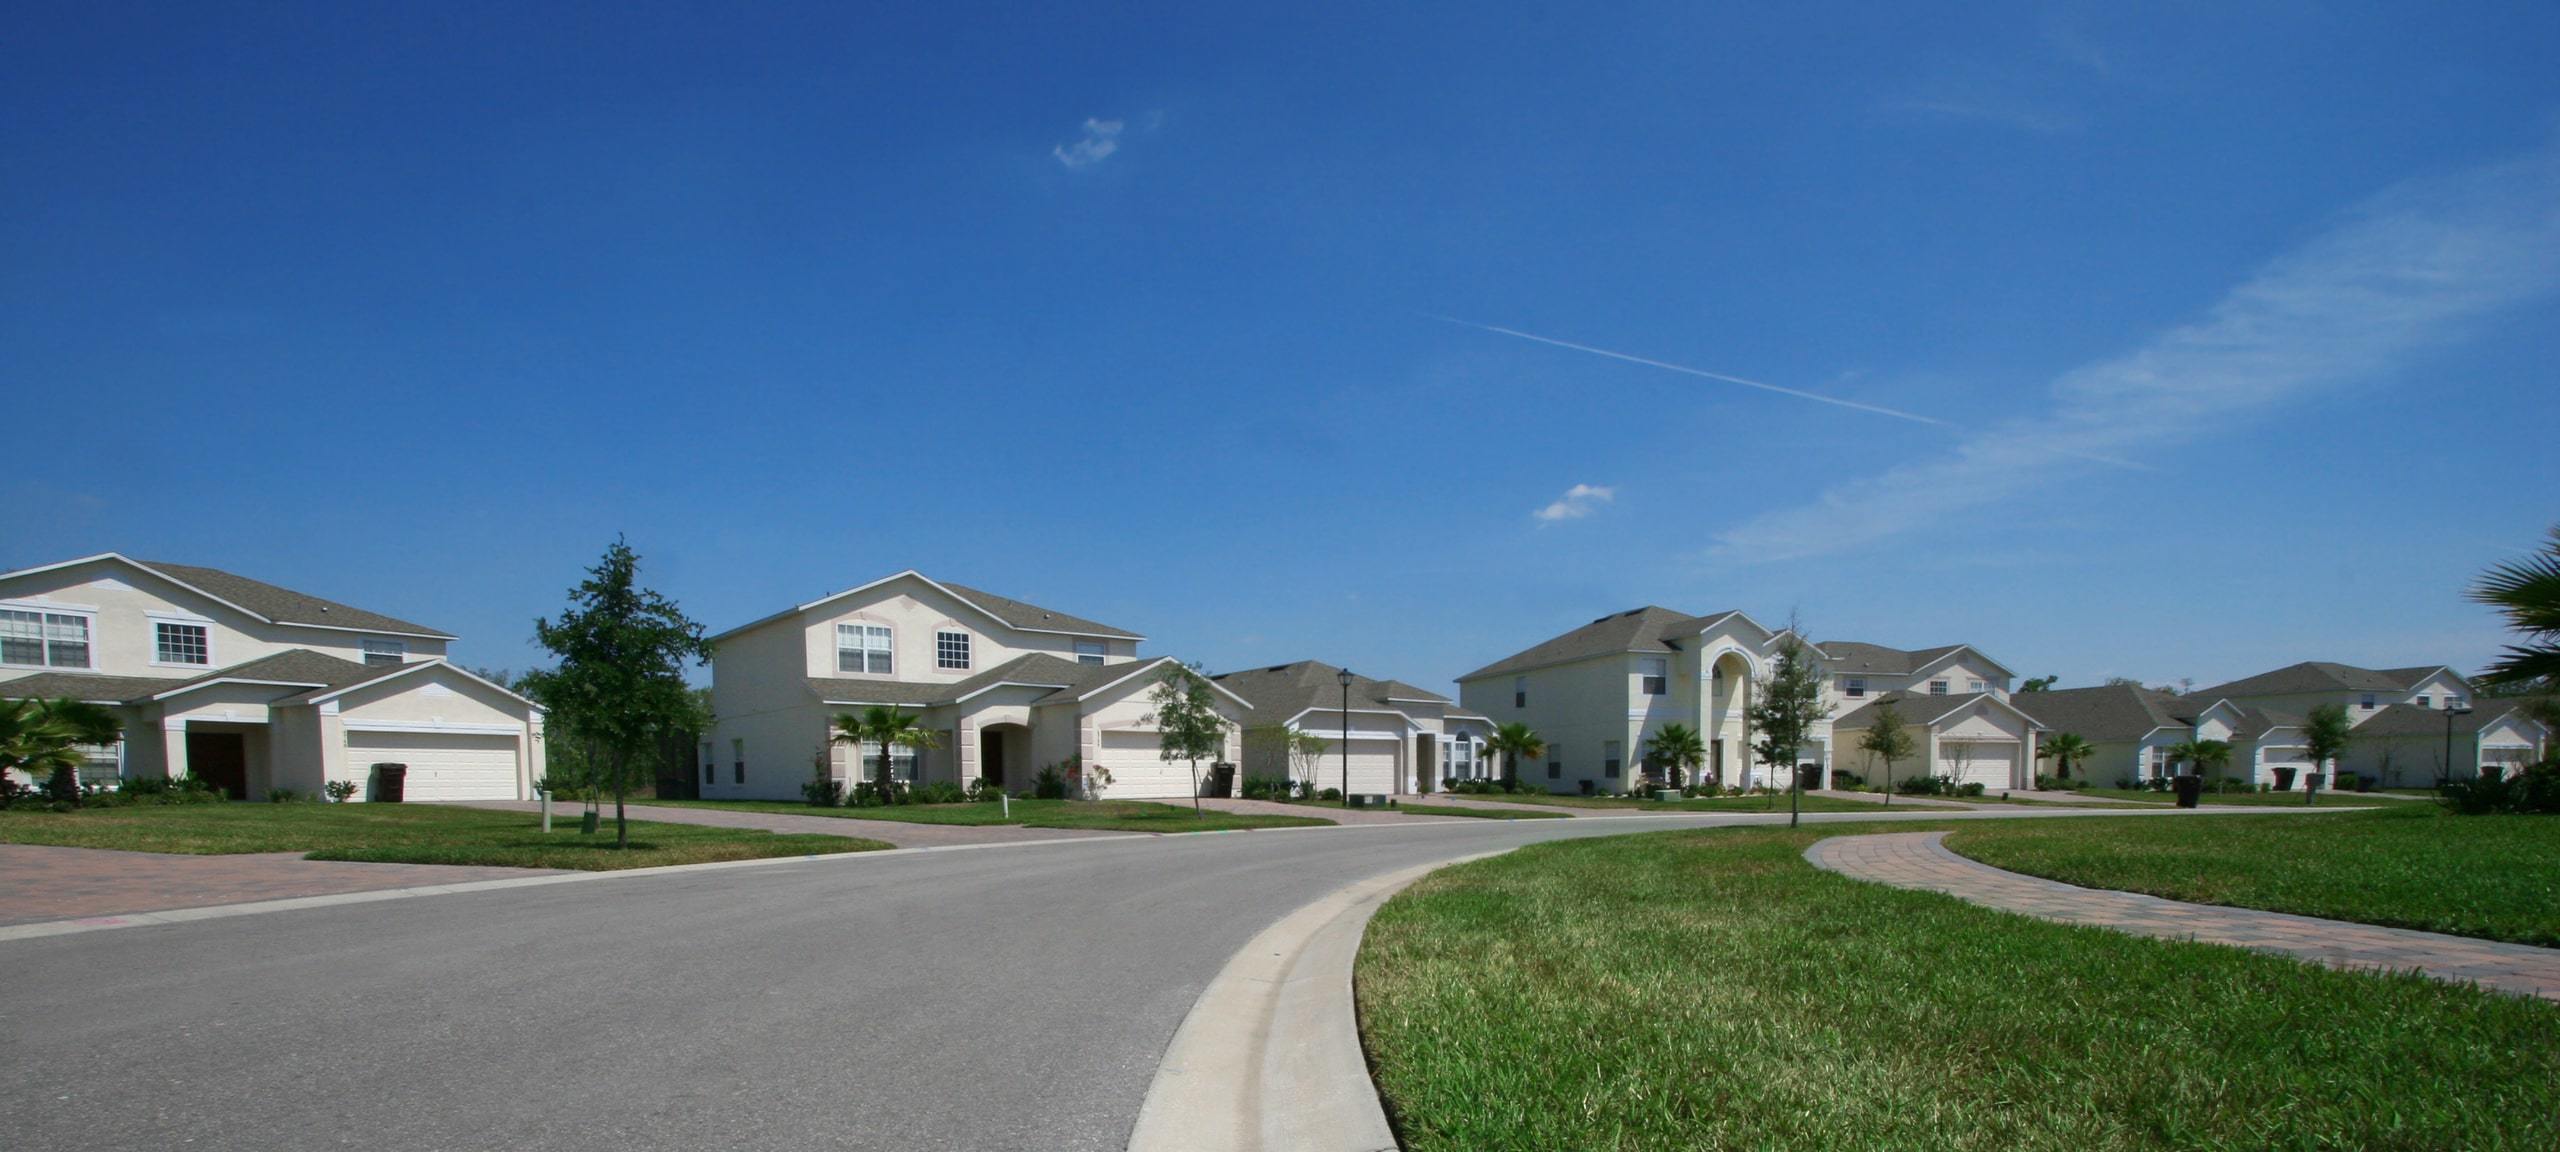 Row of large homes on residential street, typical of Winter Garden, Florida